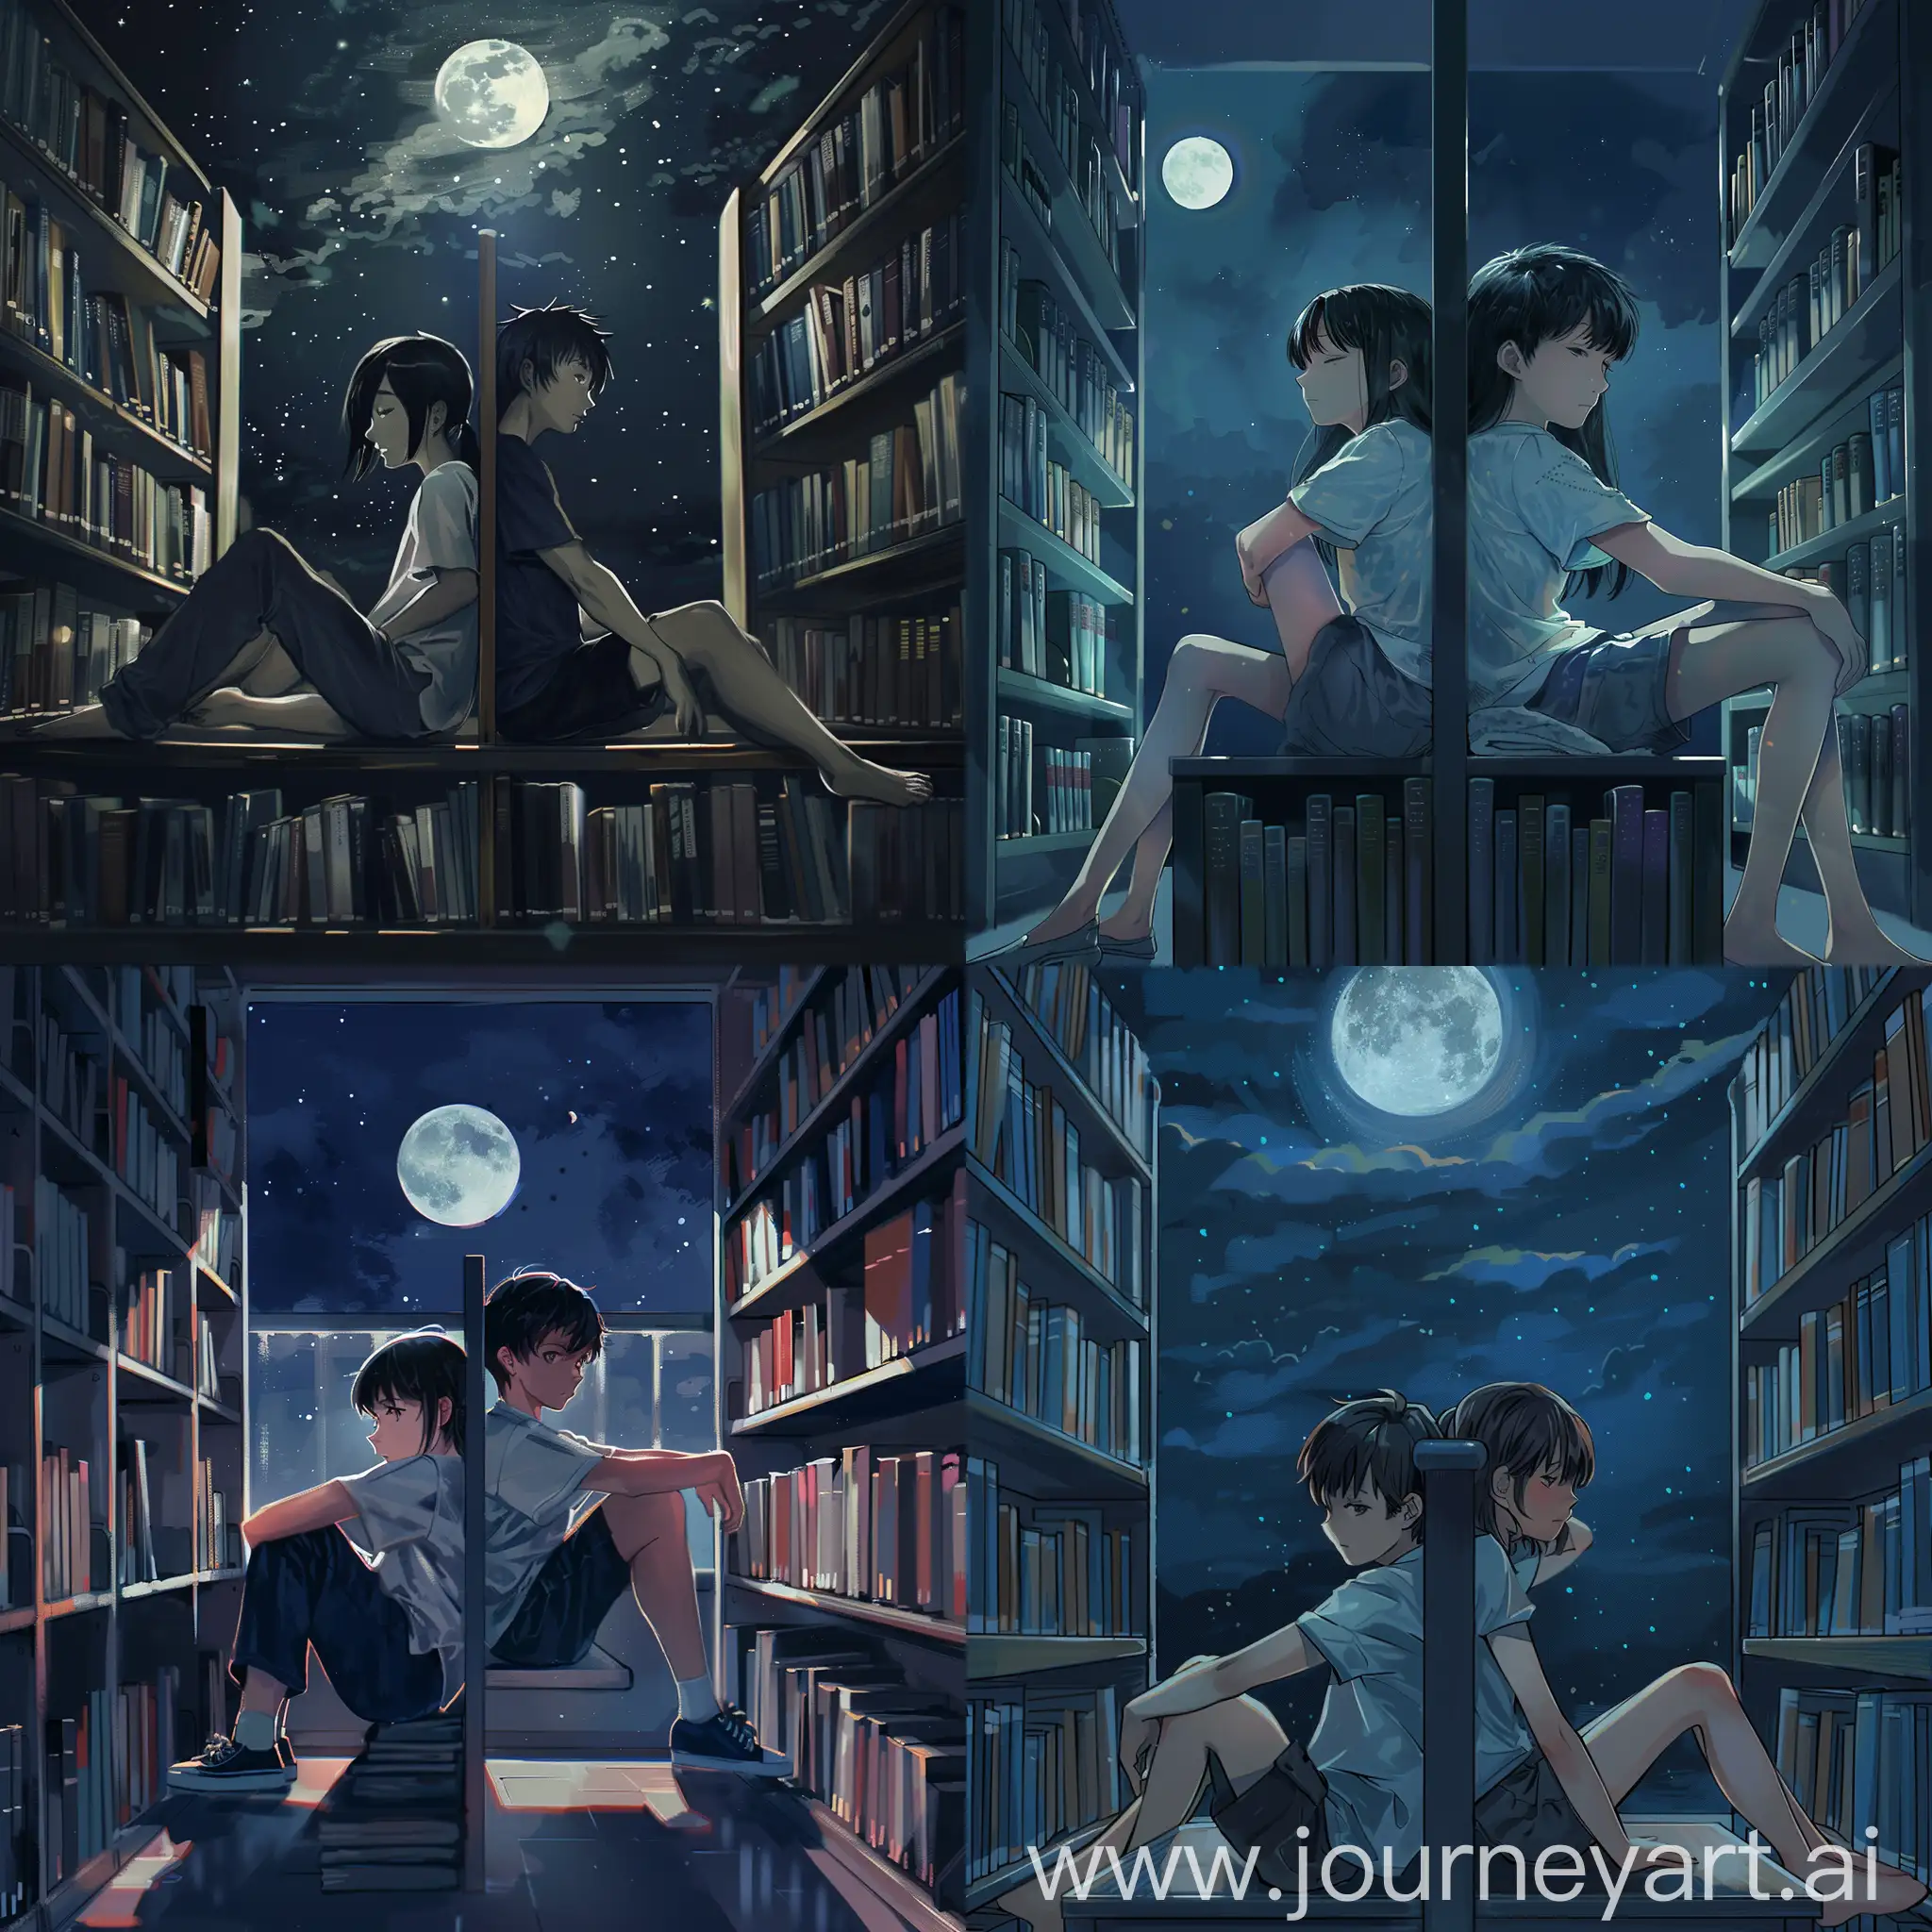 Enchanting-Moonlit-Library-Scene-with-Boy-and-Girl-Leaning-on-Bookshelf